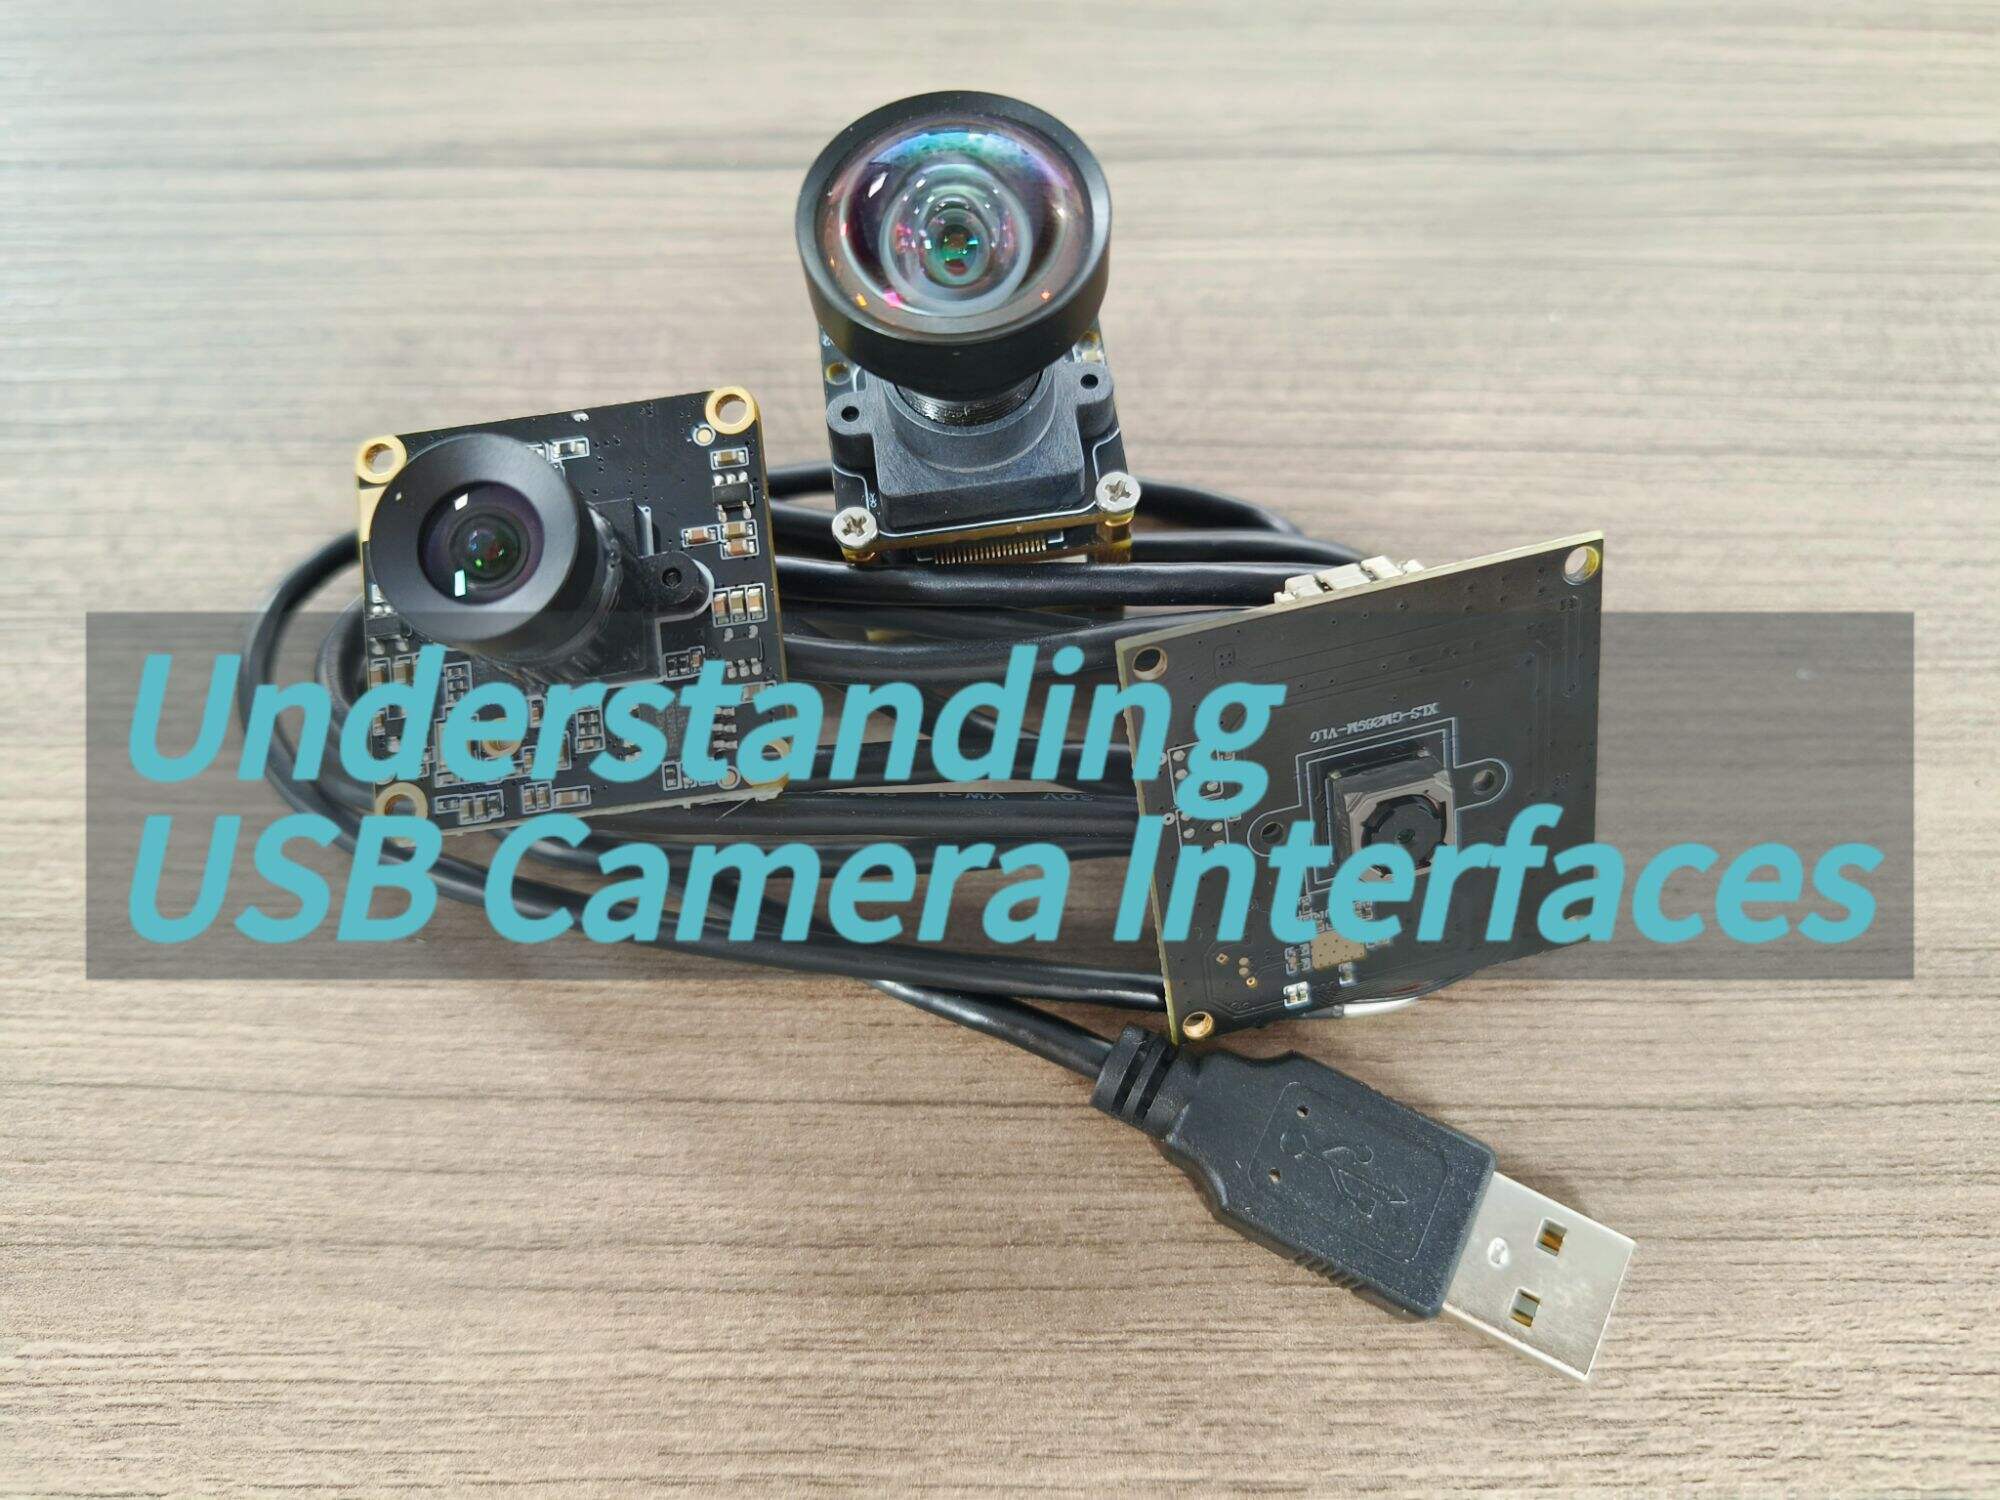 A Guide to USB Camera Interfaces and Standards